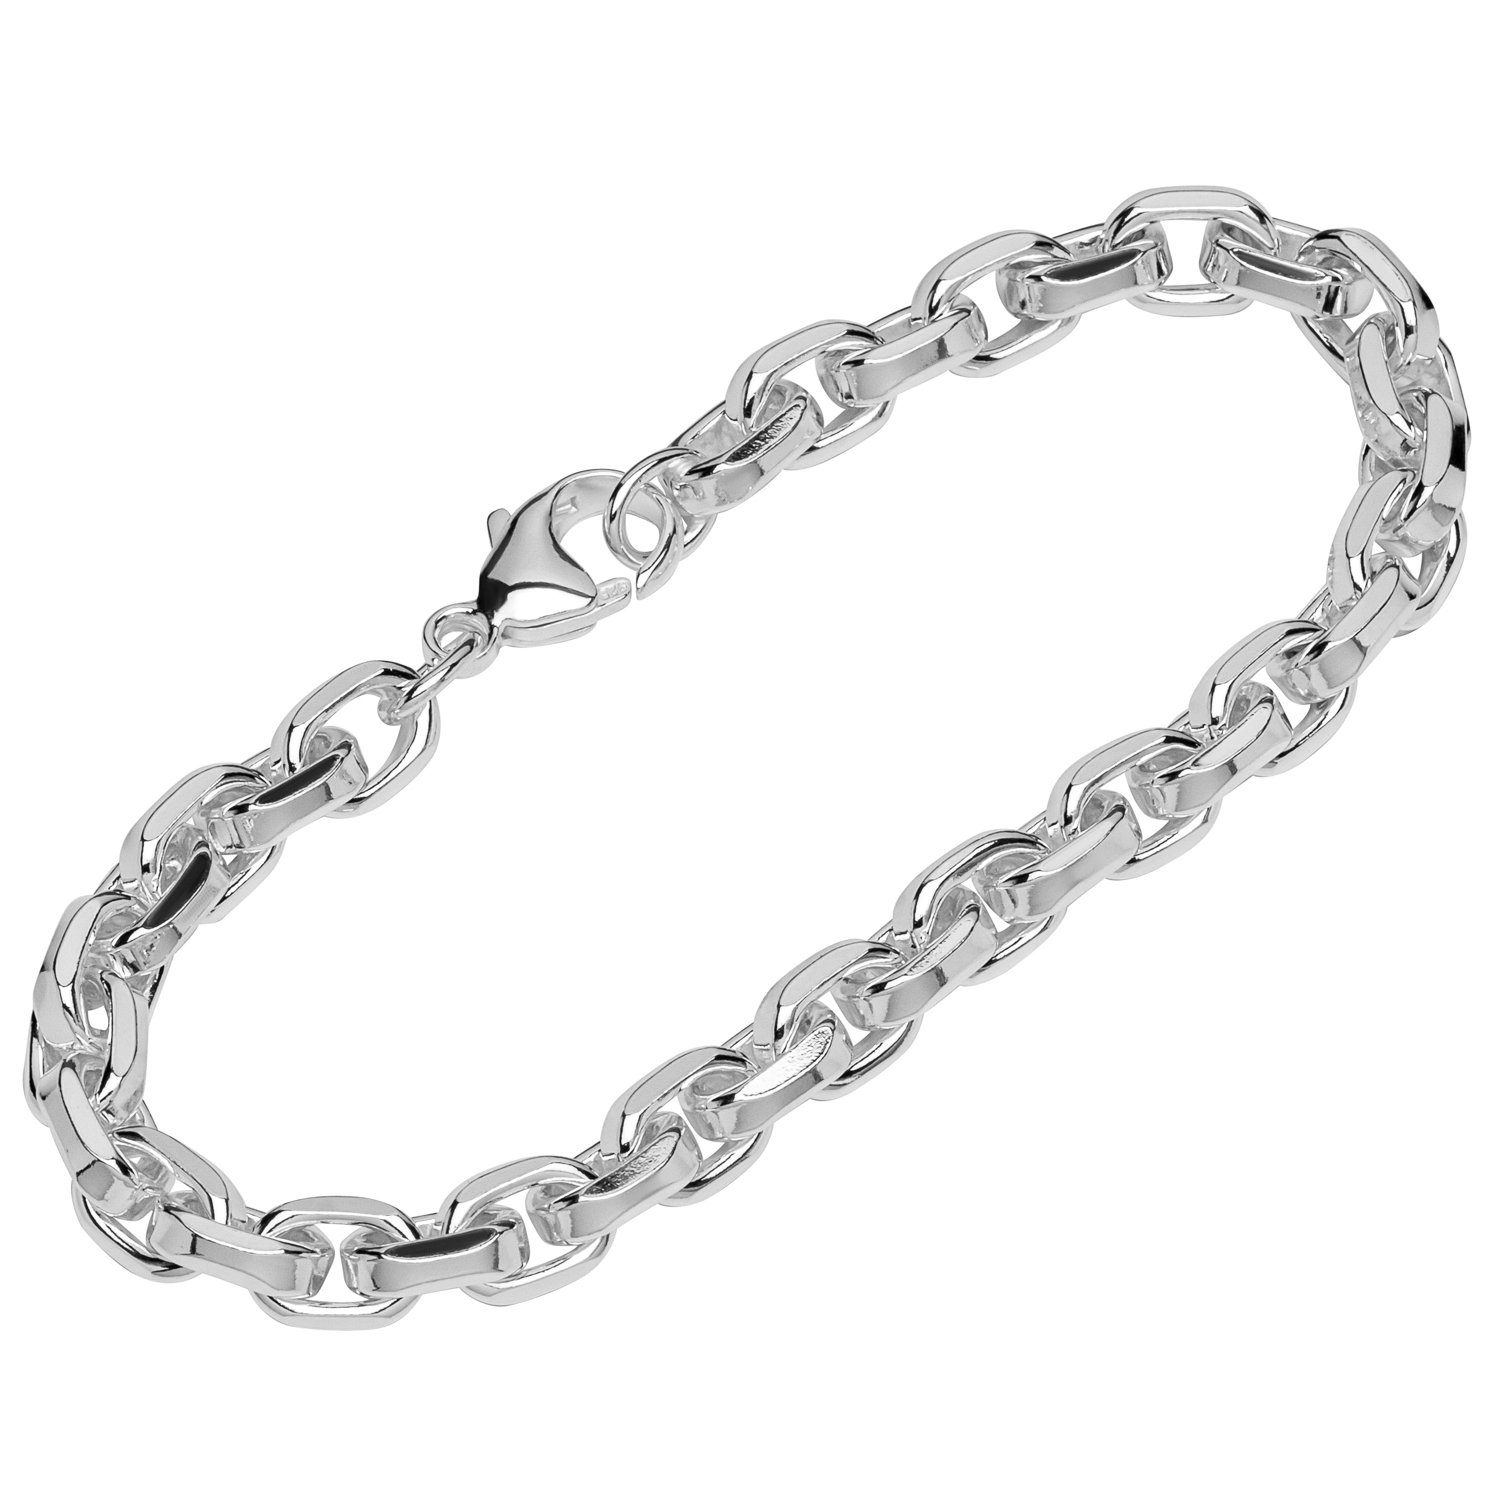 NKlaus Silberarmband Armband 925 Sterling Silber 22cm Ankerkette 6 fach (1 Stück), Made in Germany